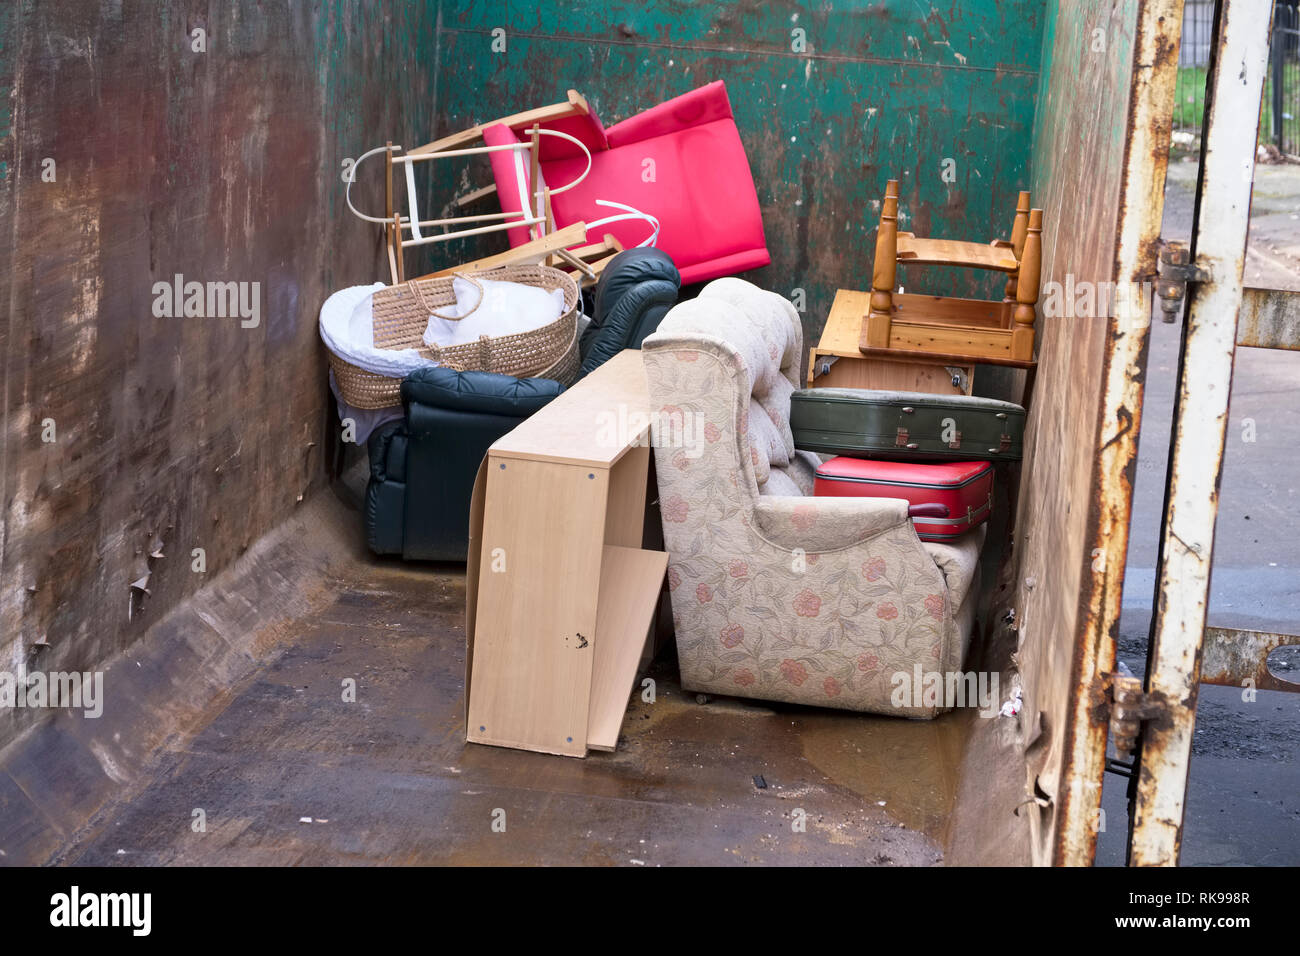 Old Furniture And Chairs Rubbish In Steel Container For Charity